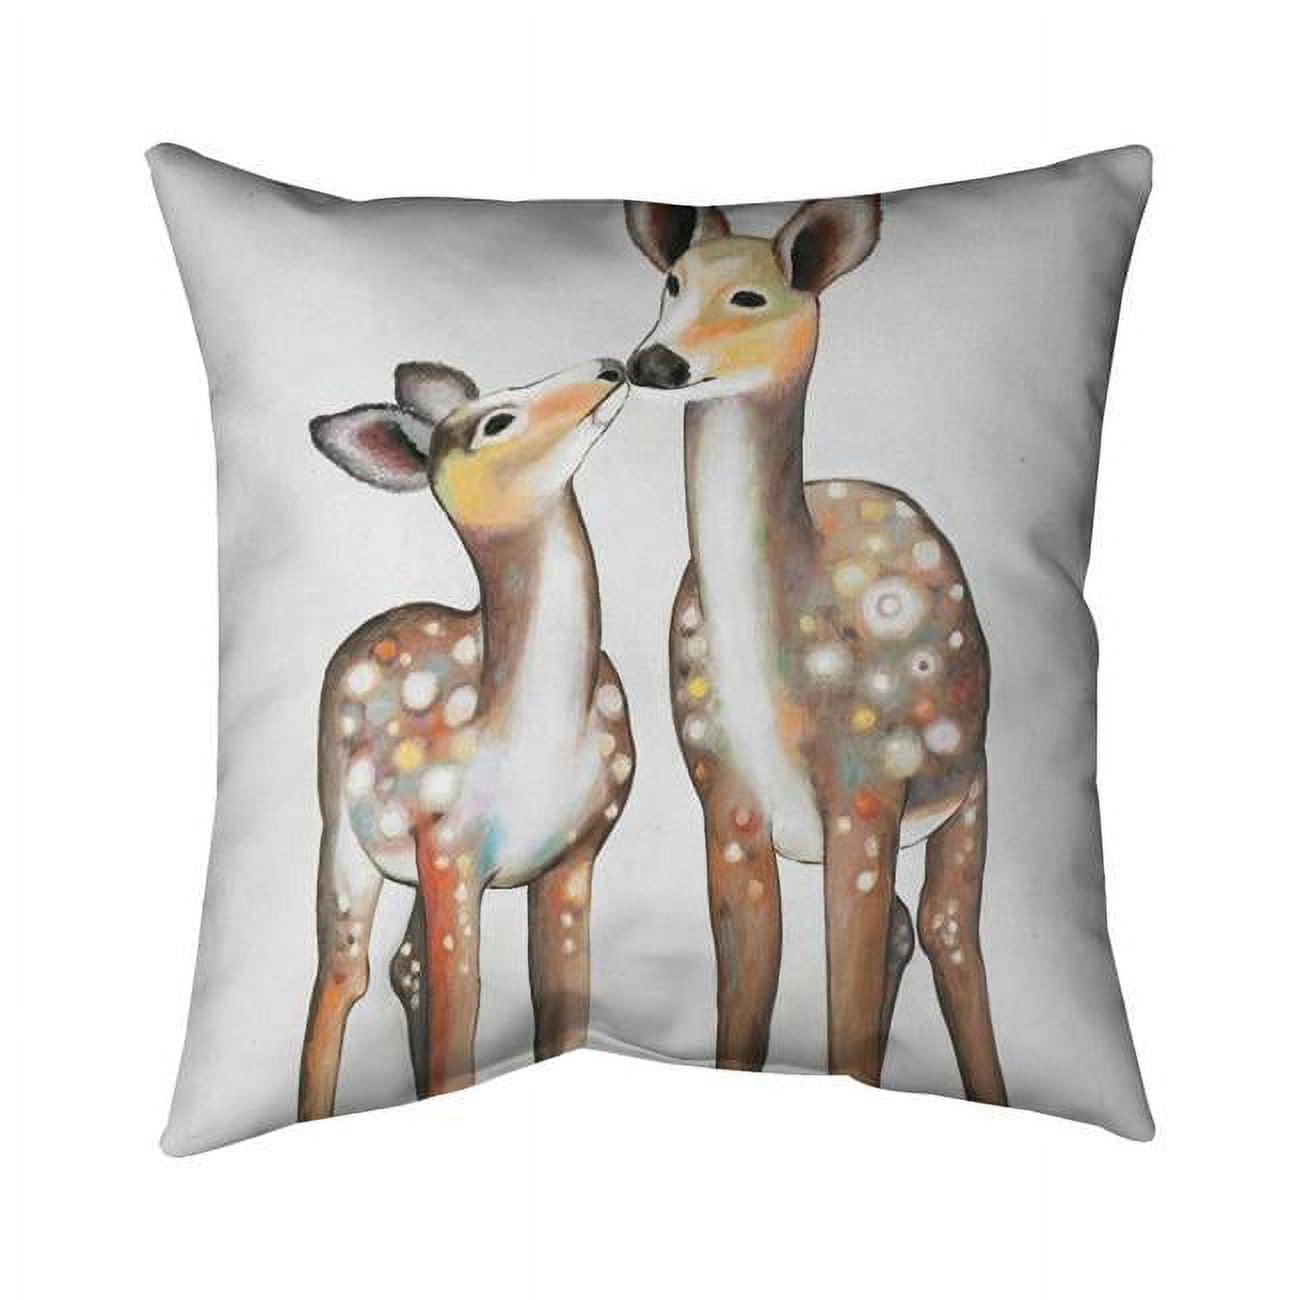 Fondo 20 x 20 in. Deer with Its Fawn-Double Sided Print Outdoor Pillow Cover